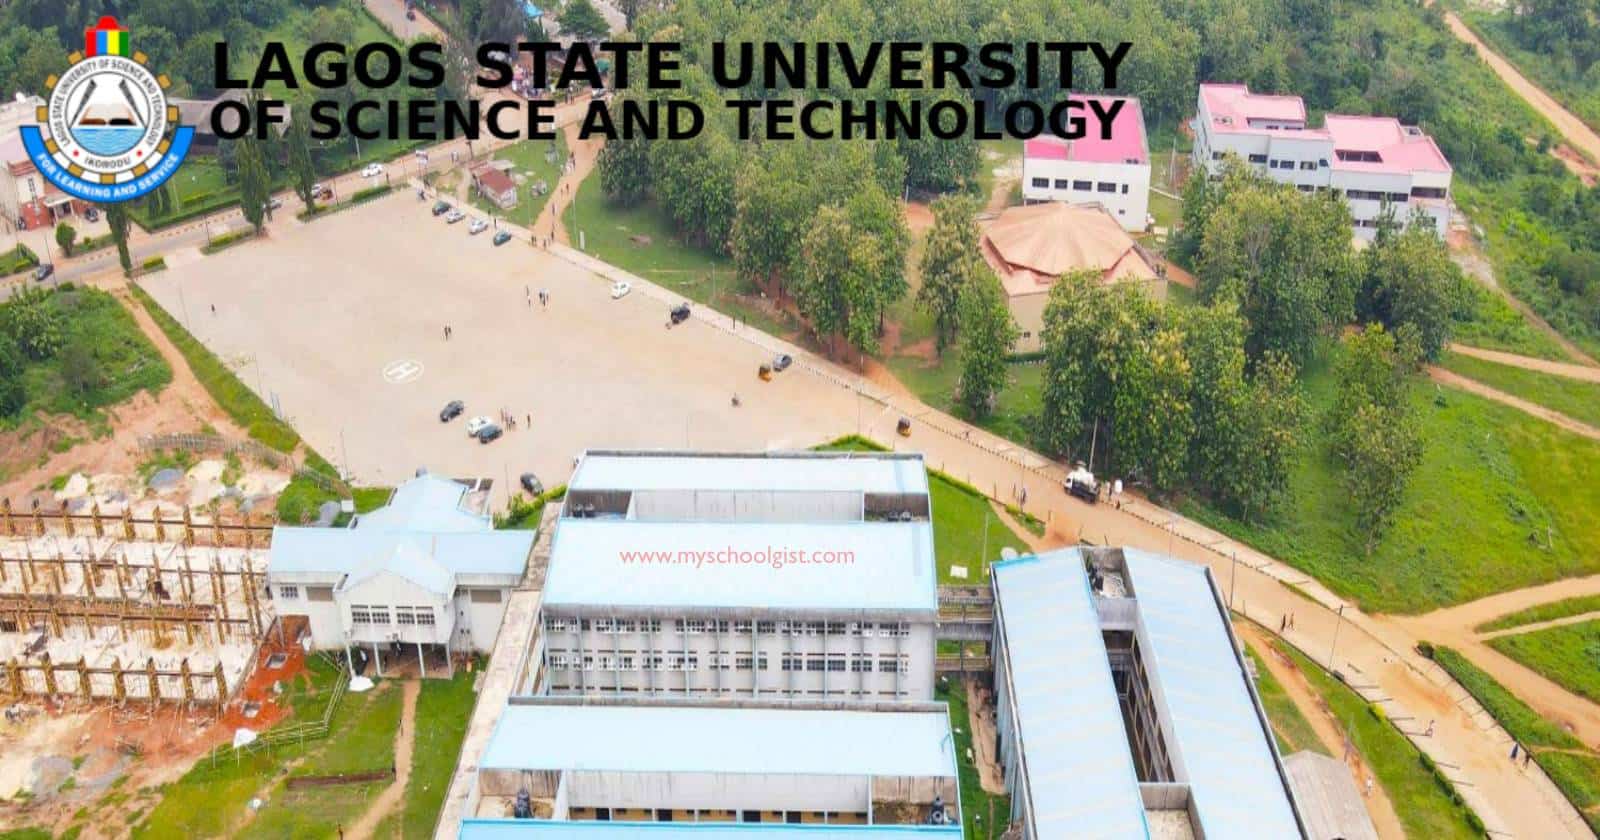 Lagos State University of Science and Technology (LASUSTECH) Admission List